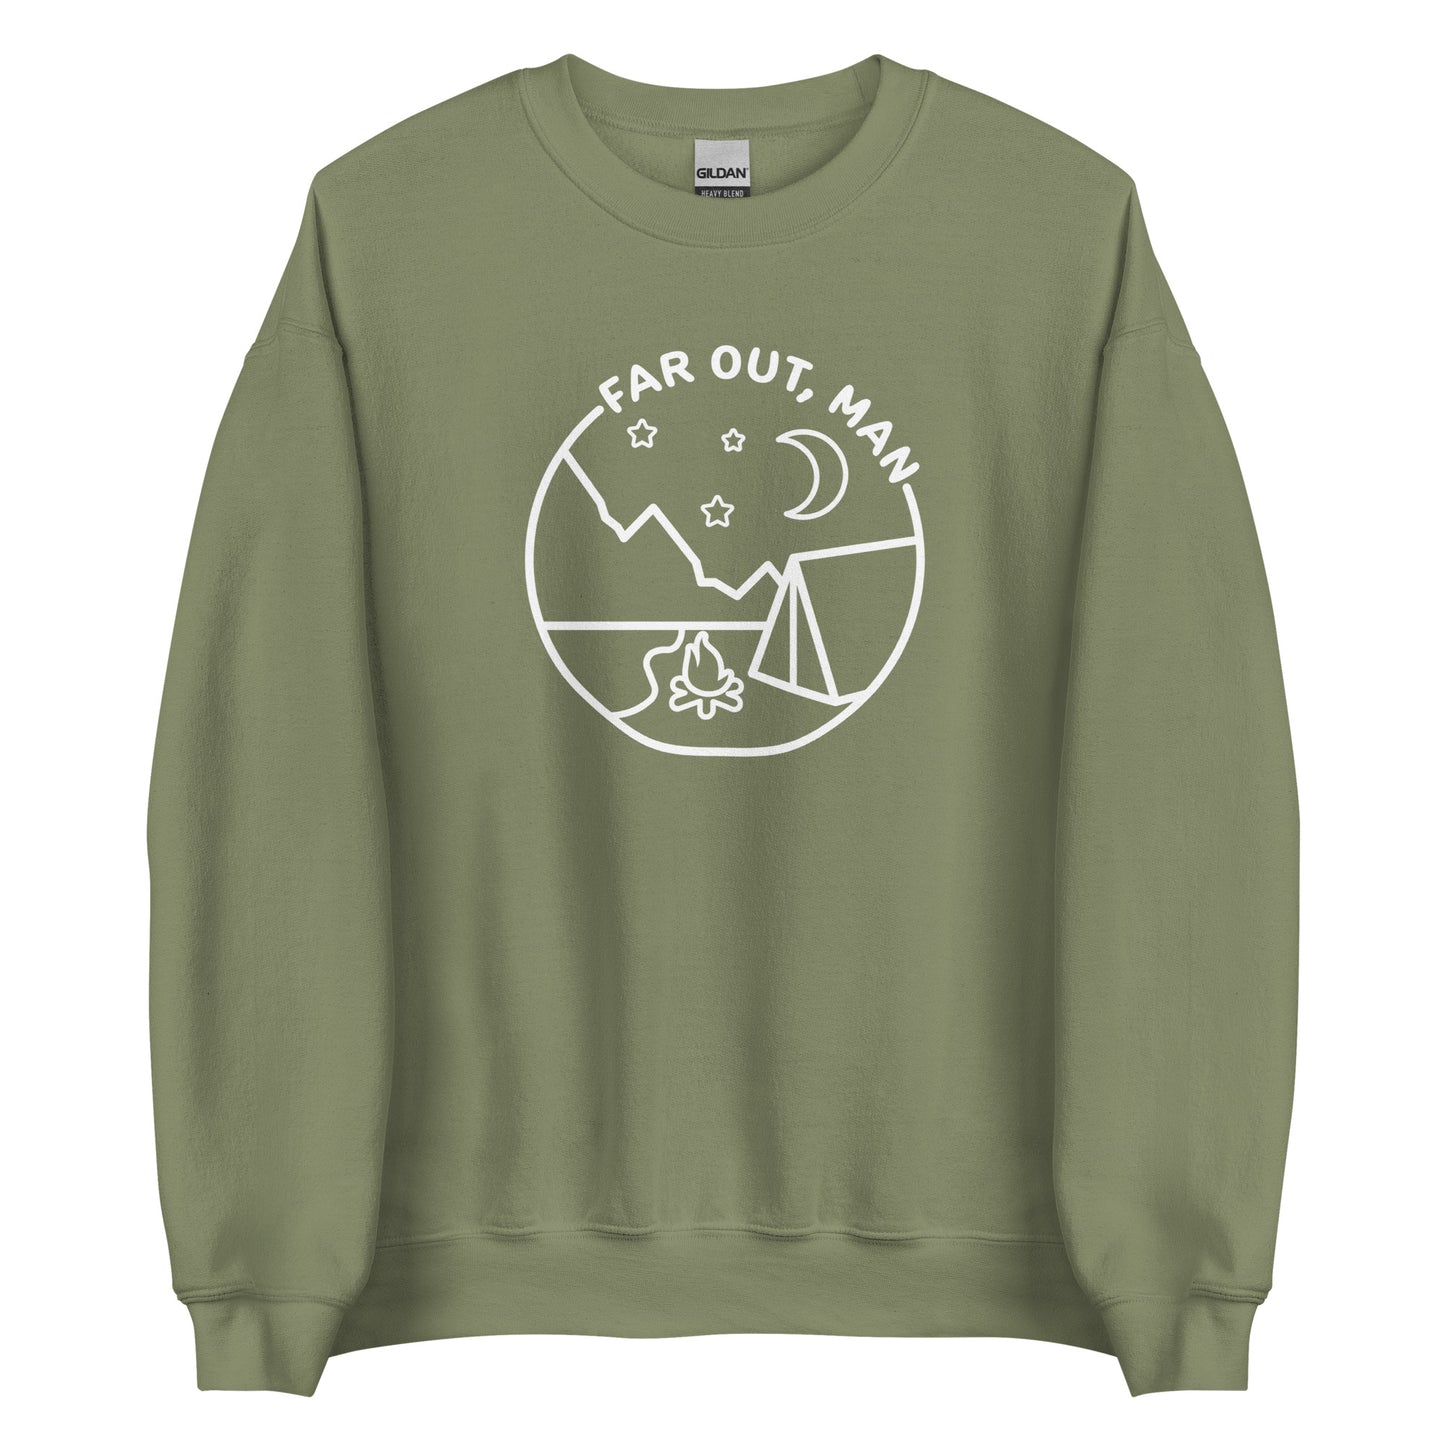 An olive green crewneck sweatshirt featuring a white lineart illustration of a tent and campfire under a night sky. Text in an arc above the illustration reads "Far out, man"